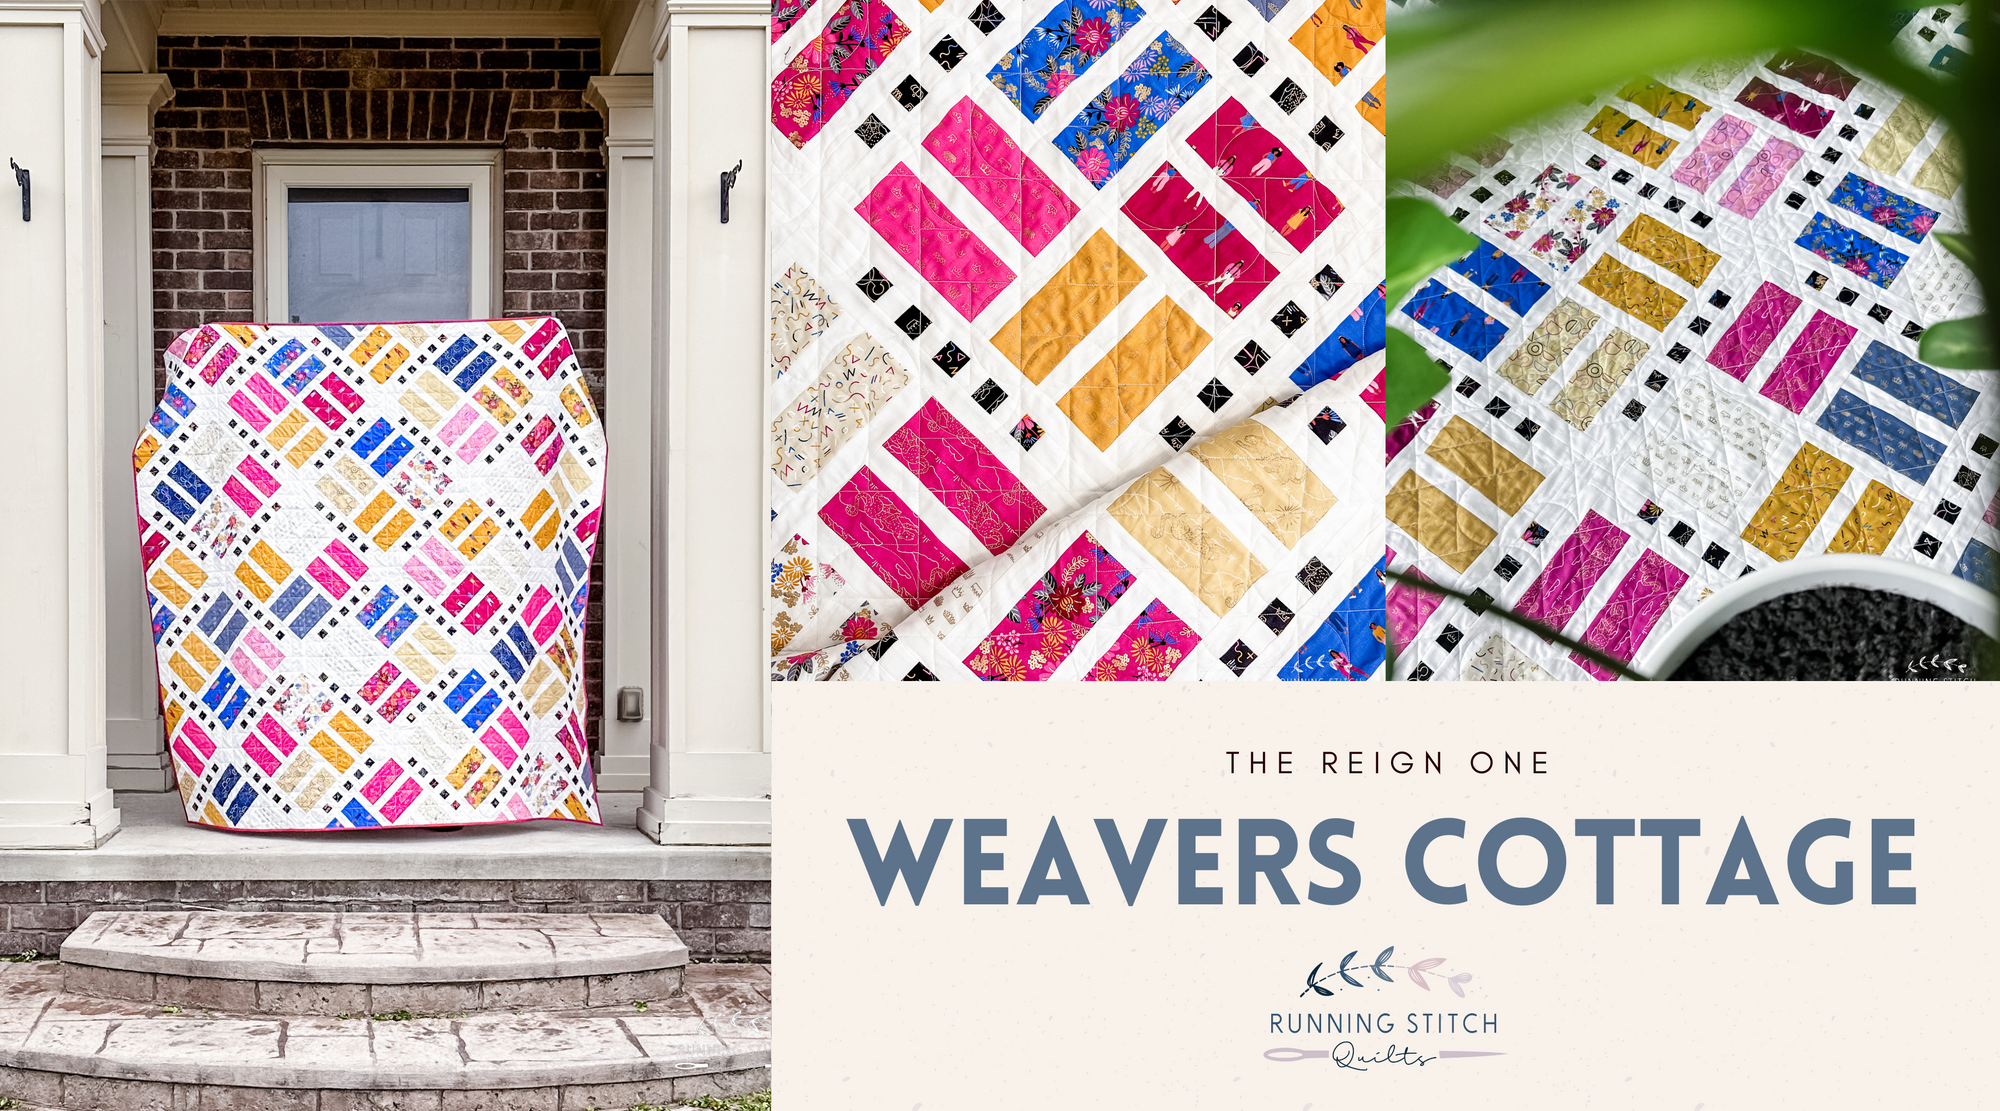 Weavers Cottage - The Reign One